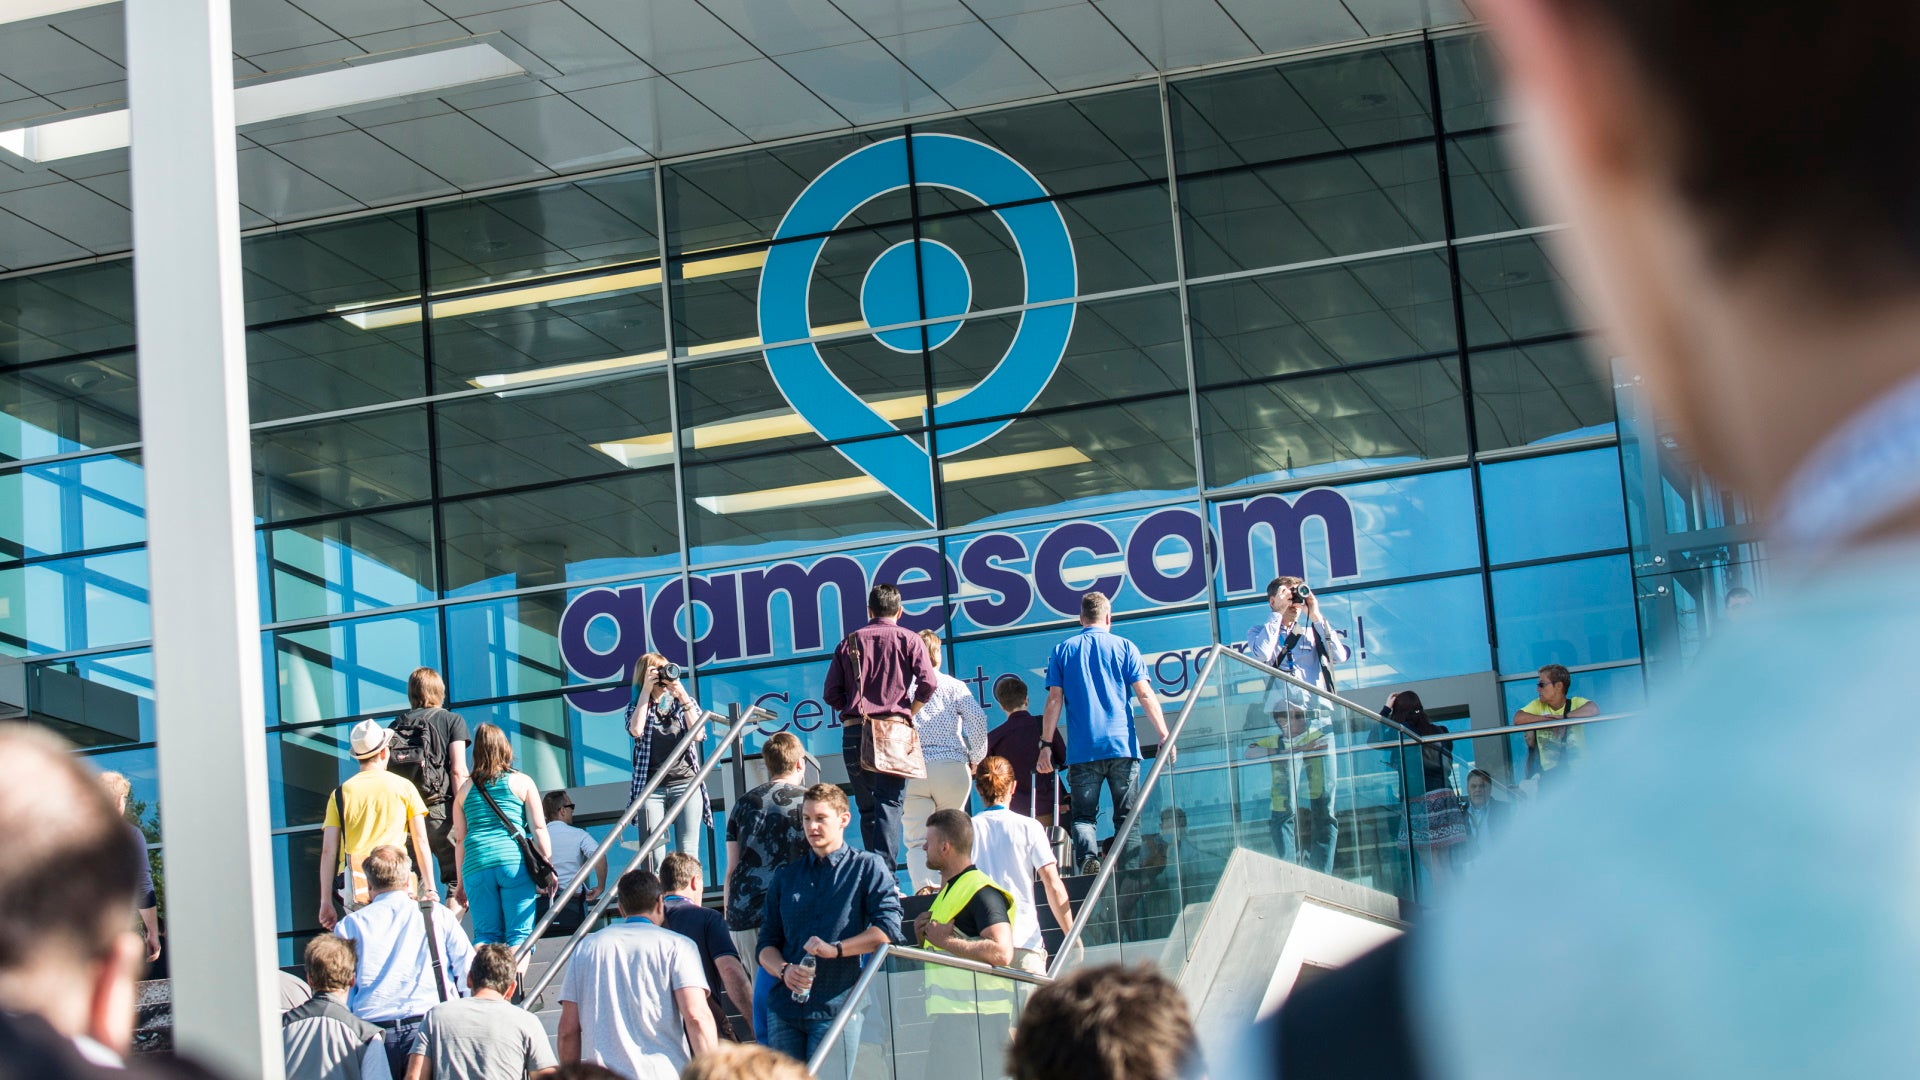 The exterior of the Kolnmesse convention centre showing the Gamescom logo in the window